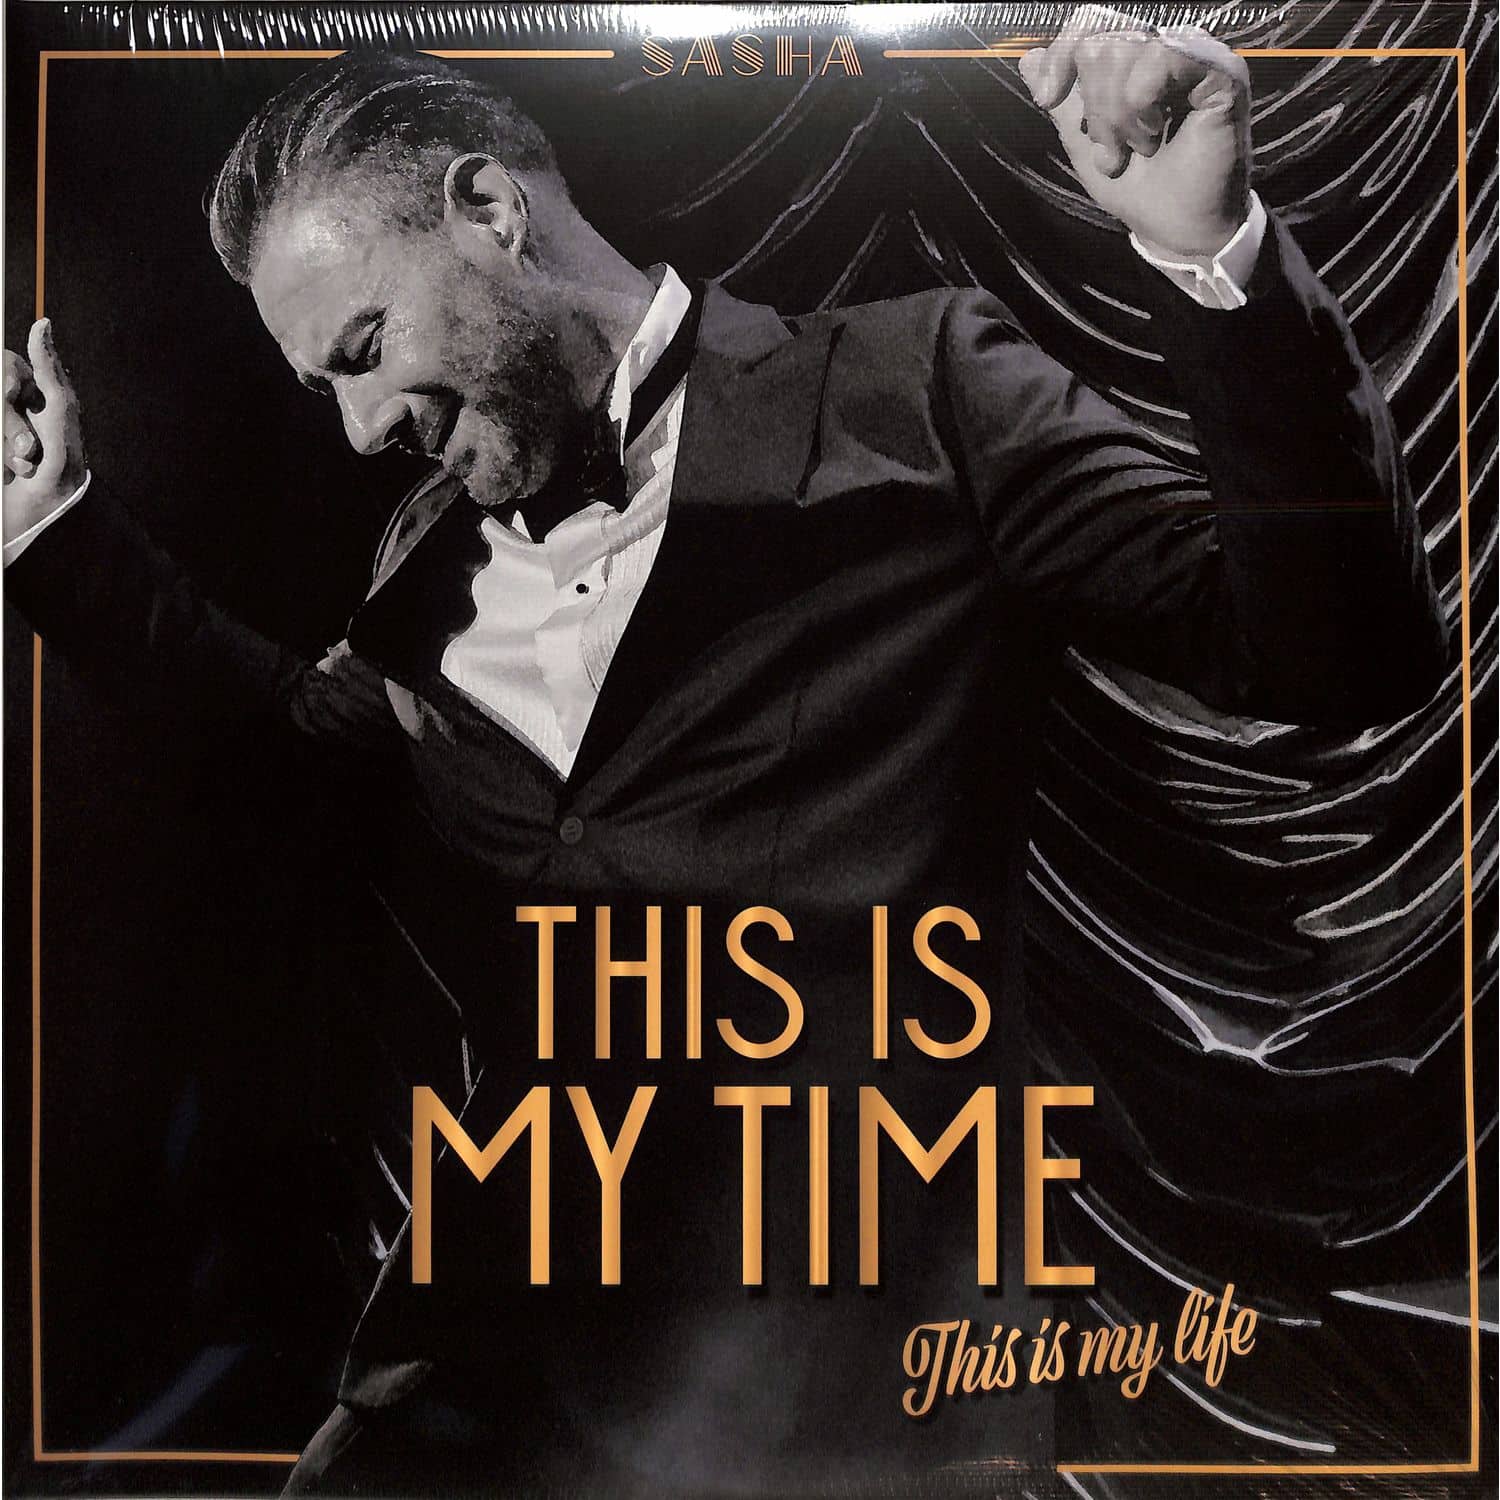 Sasha - THIS IS MY TIME.THIS IS MY LIFE.-POP-UP-VINYL 